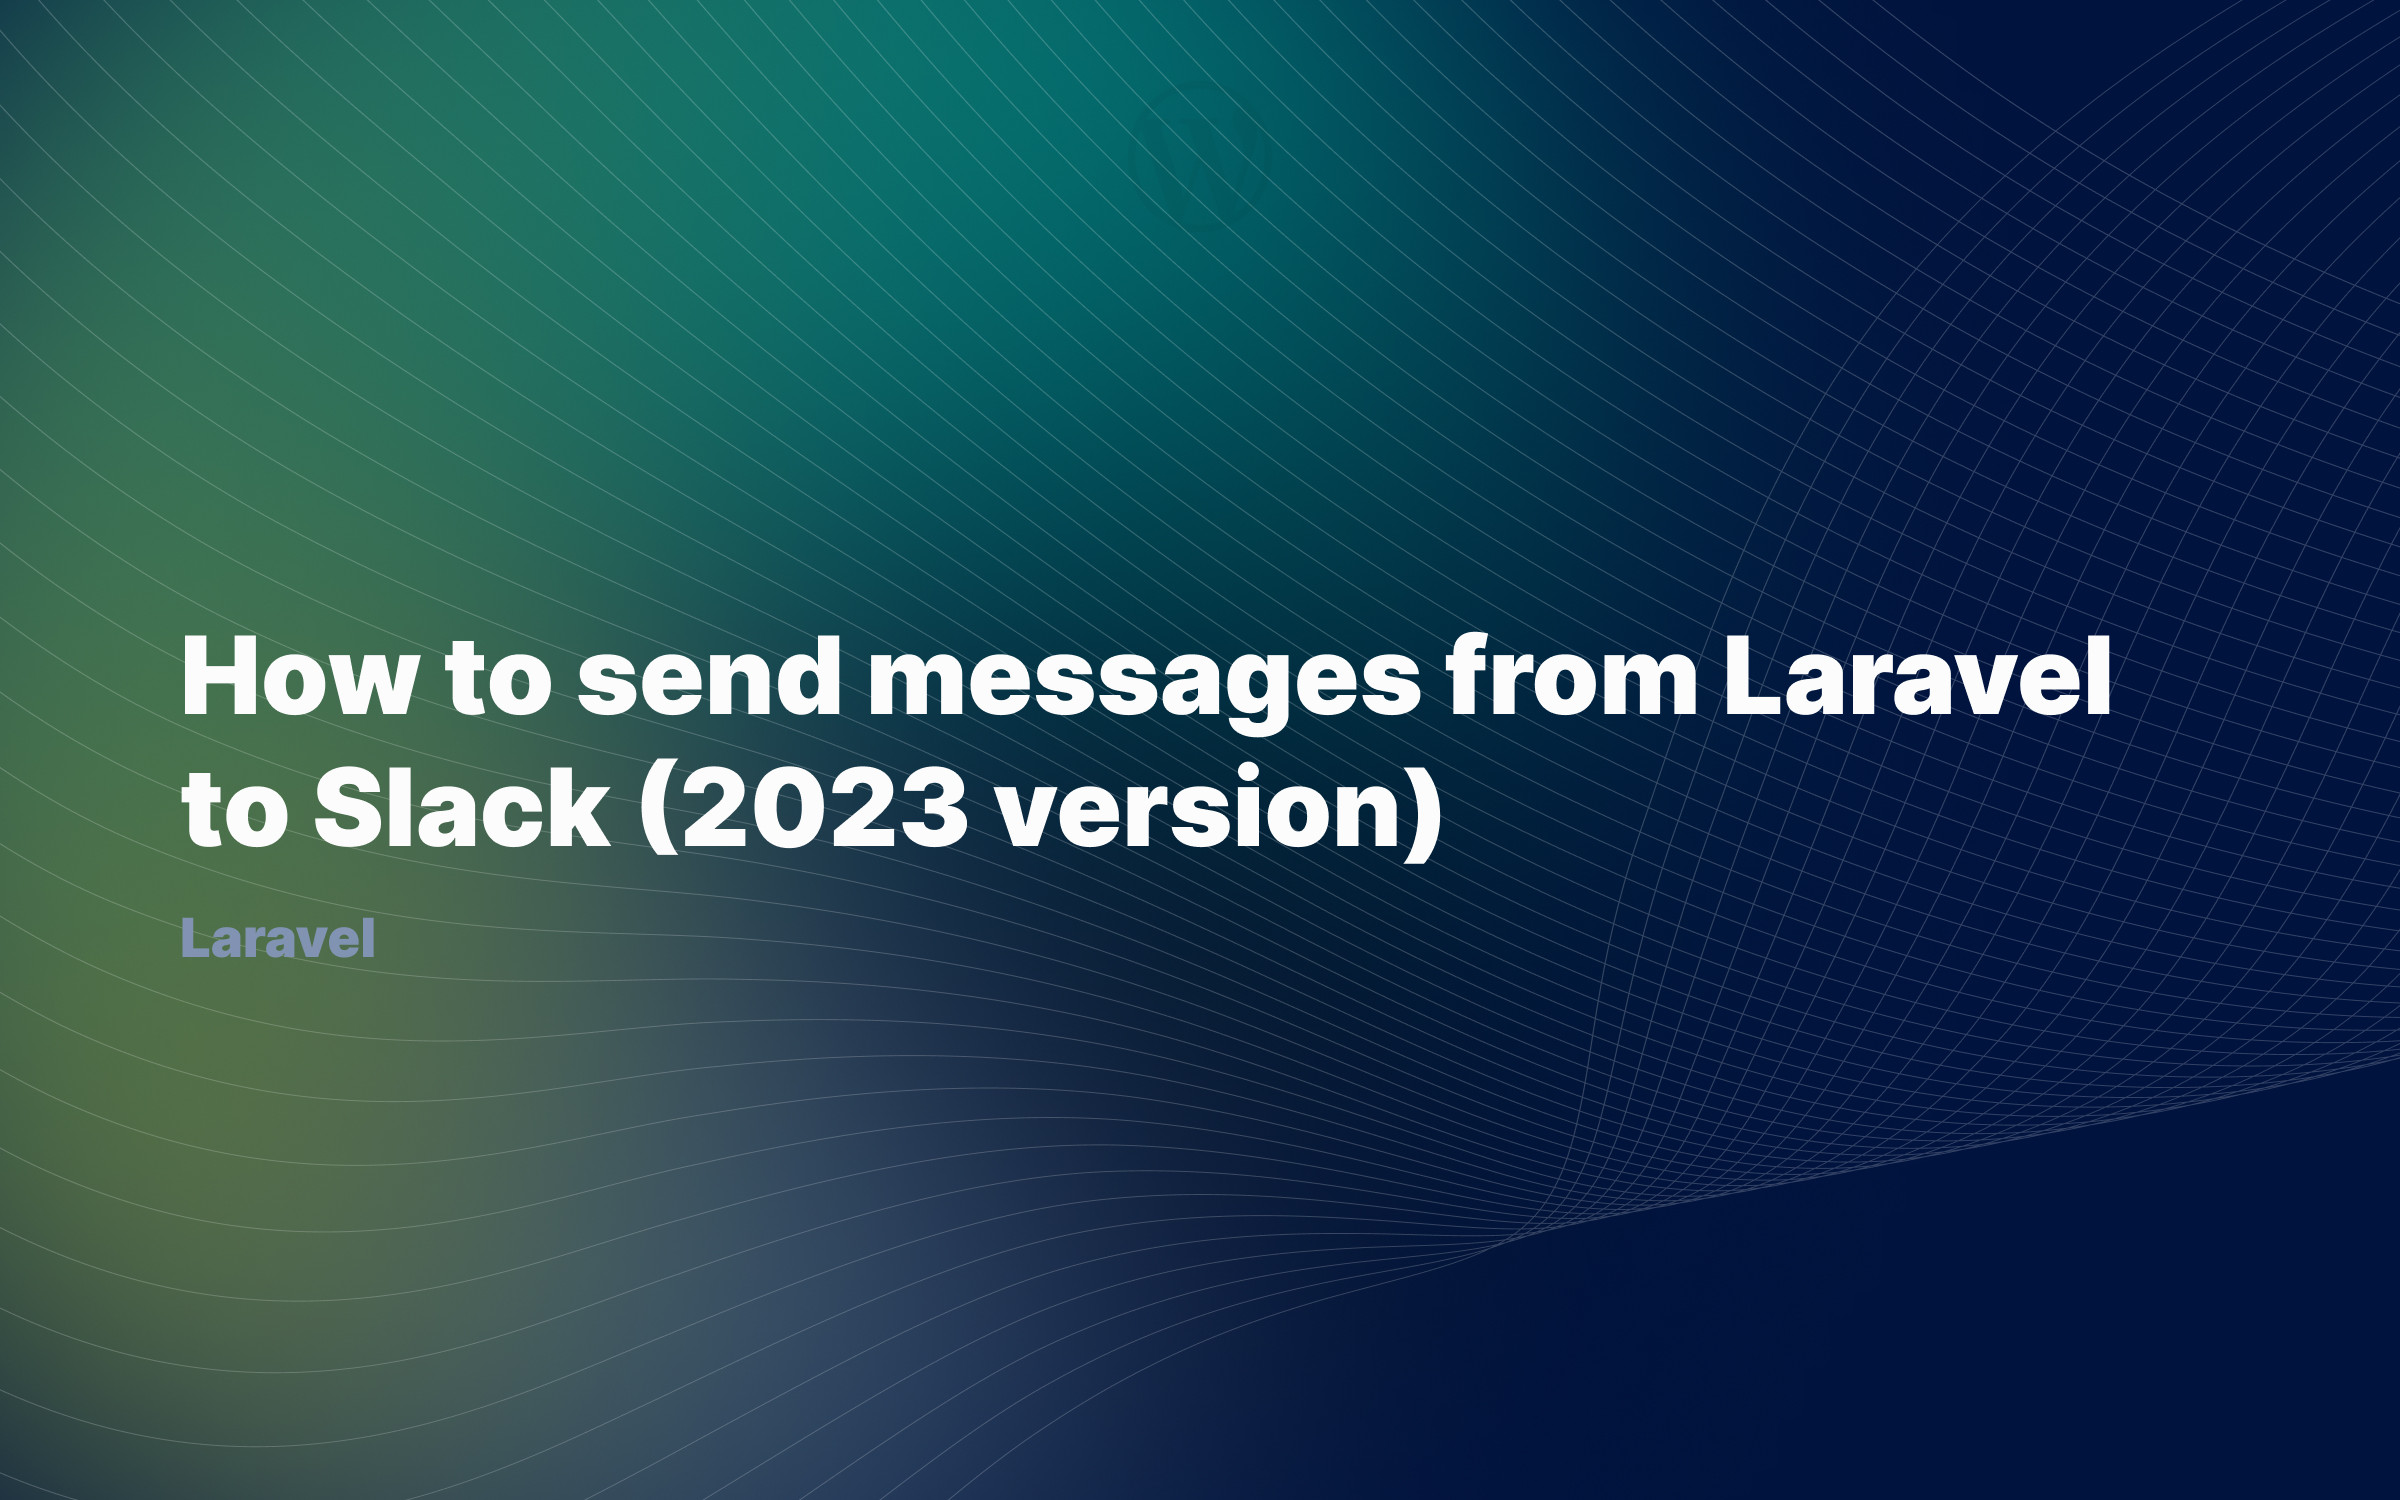 How to send messages from Laravel to Slack (2023 version)